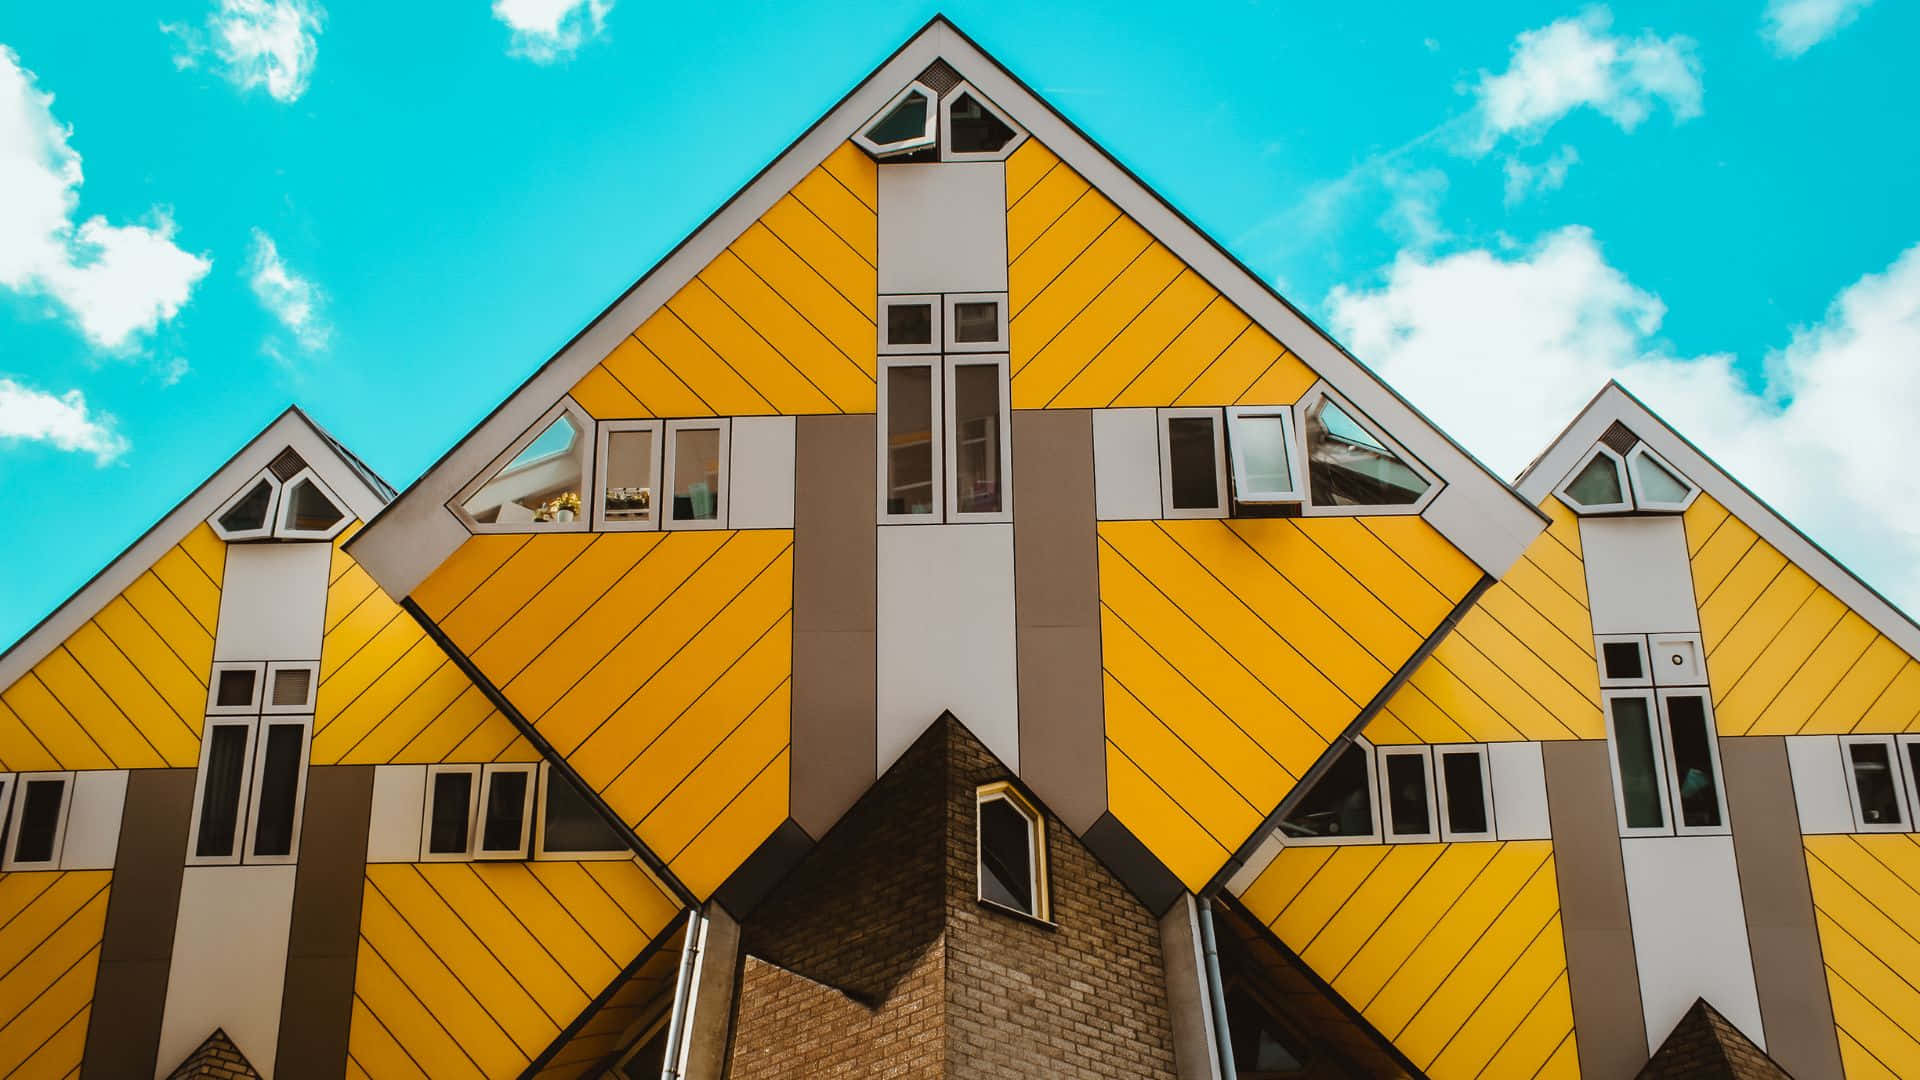 Rotterdam Cube Houses Architecture Wallpaper